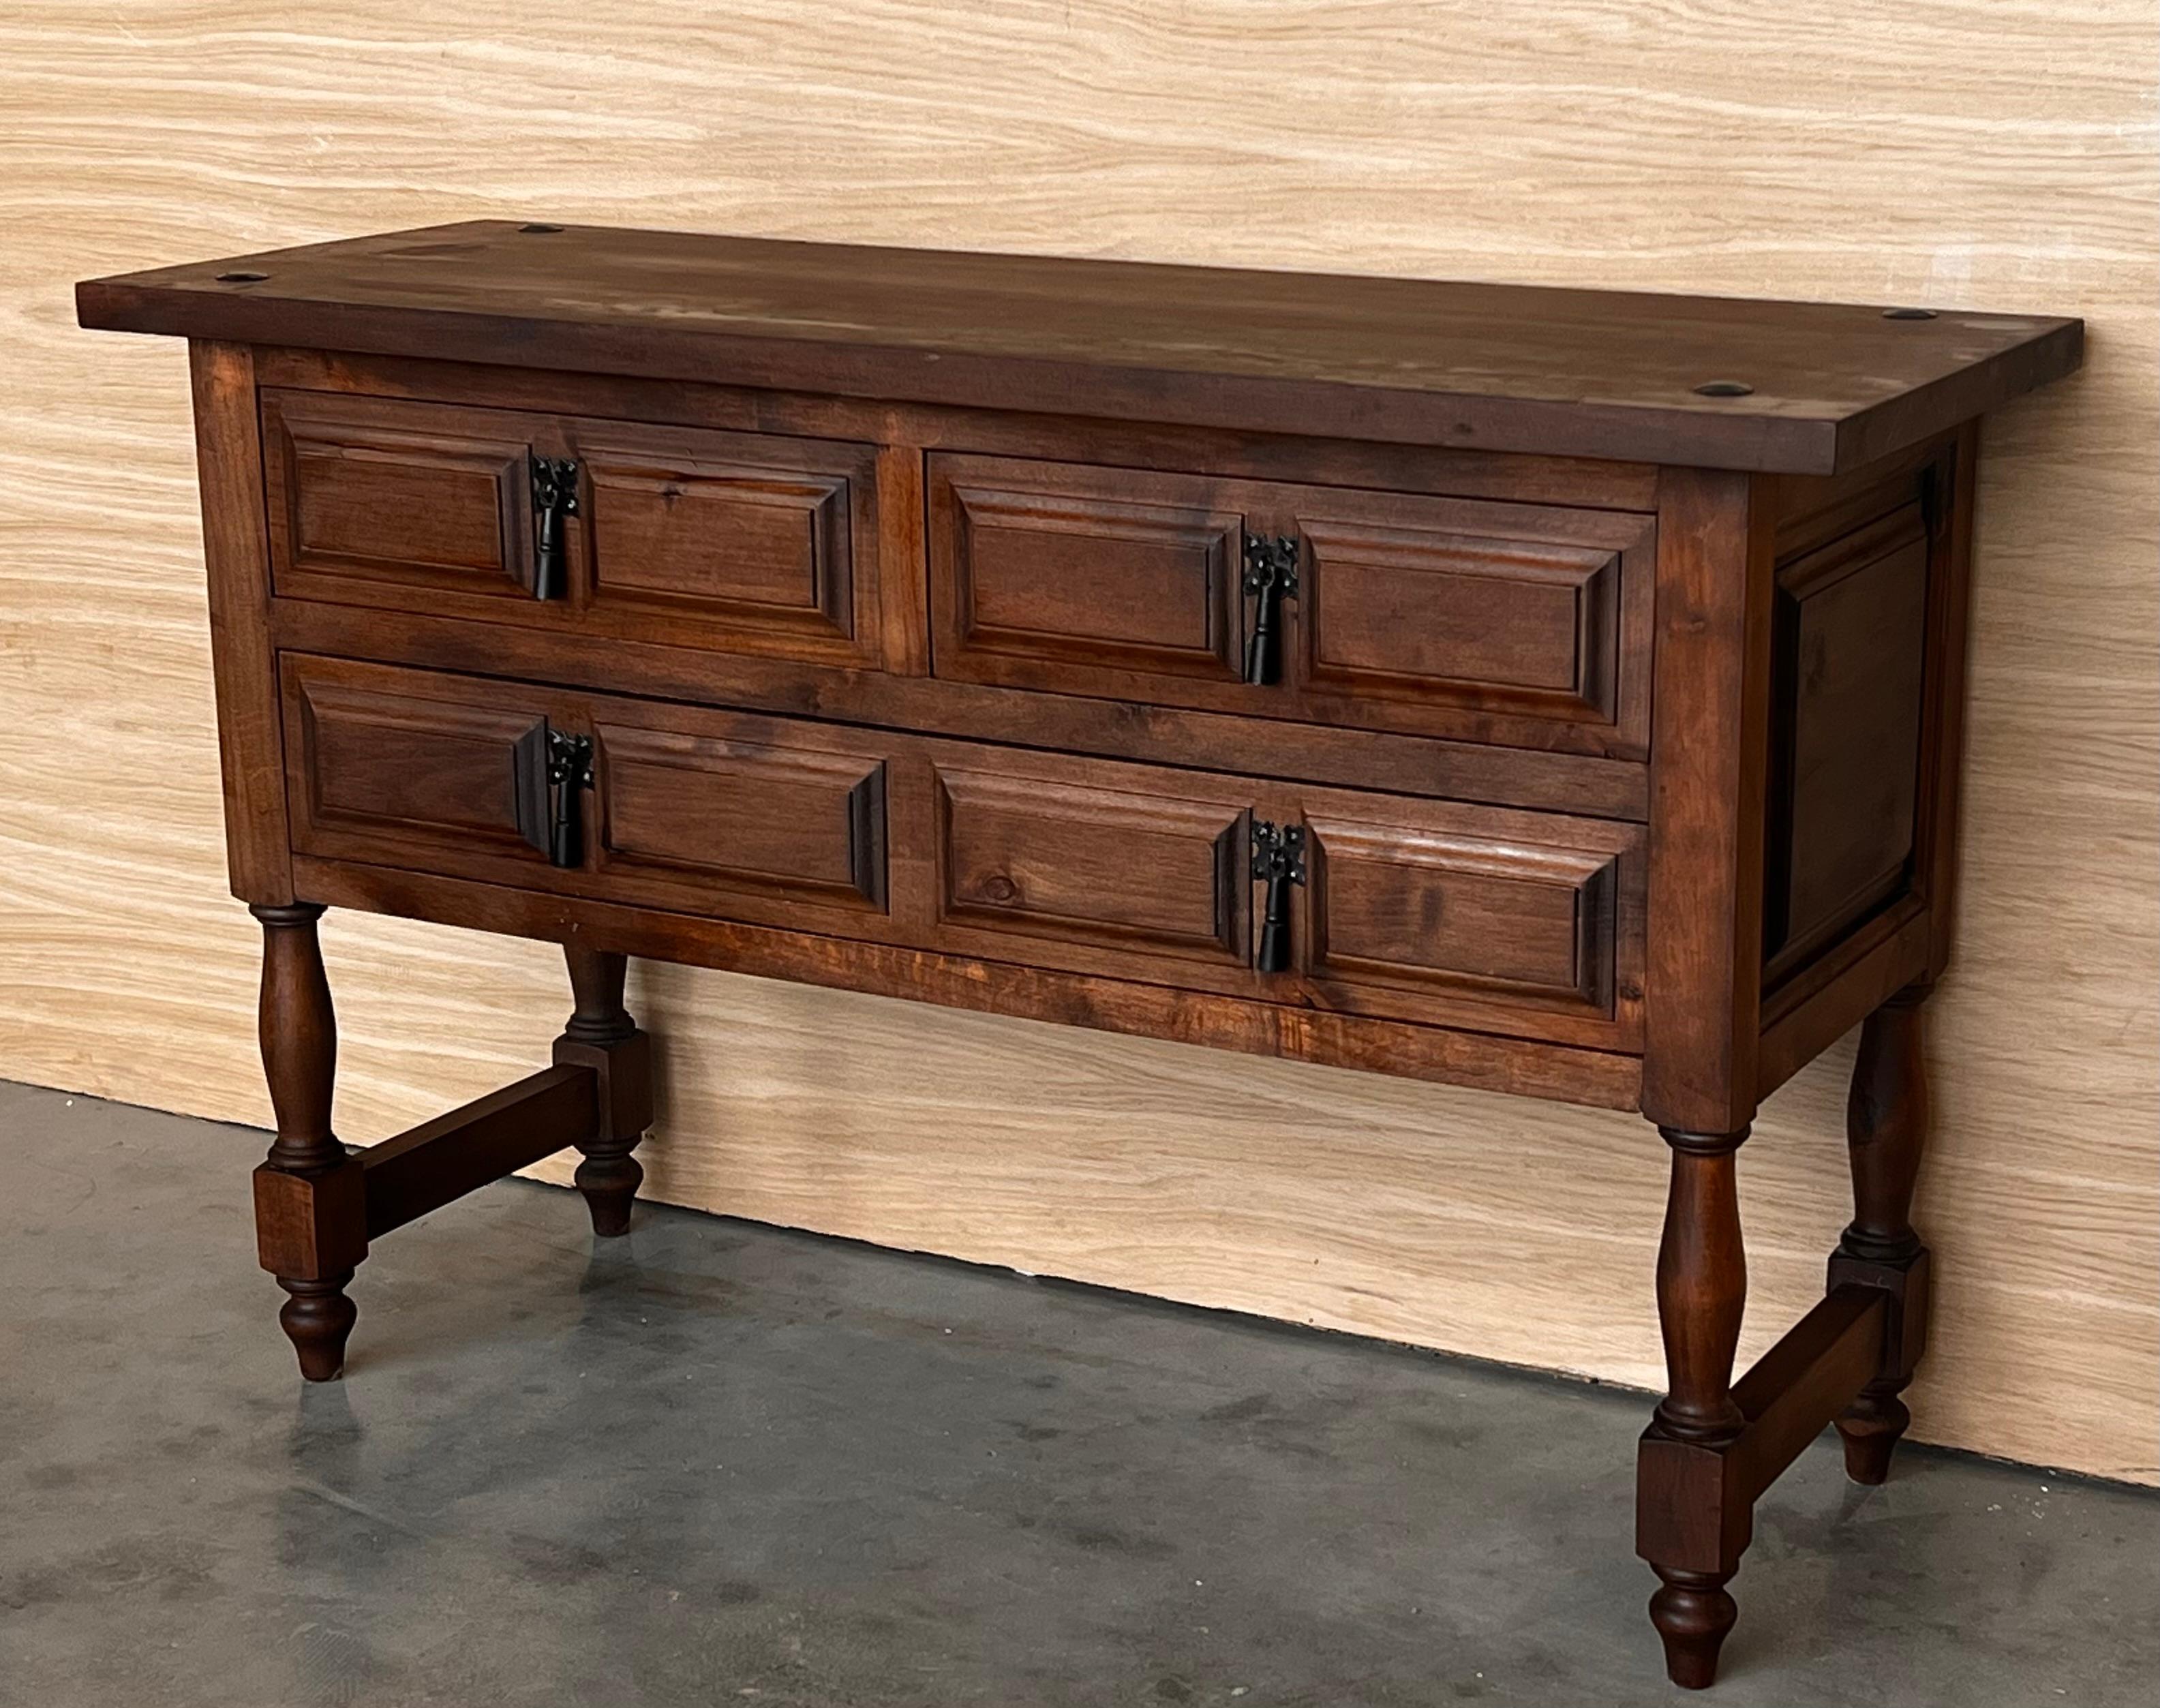 19th century Spanish antique walnut chest of four drawers and original iron hardware.
You can use like a commode or chest of drawers or large nightstand.
This elegant console was crafted in Spain, circa 1890. The sofa table with four legs features a